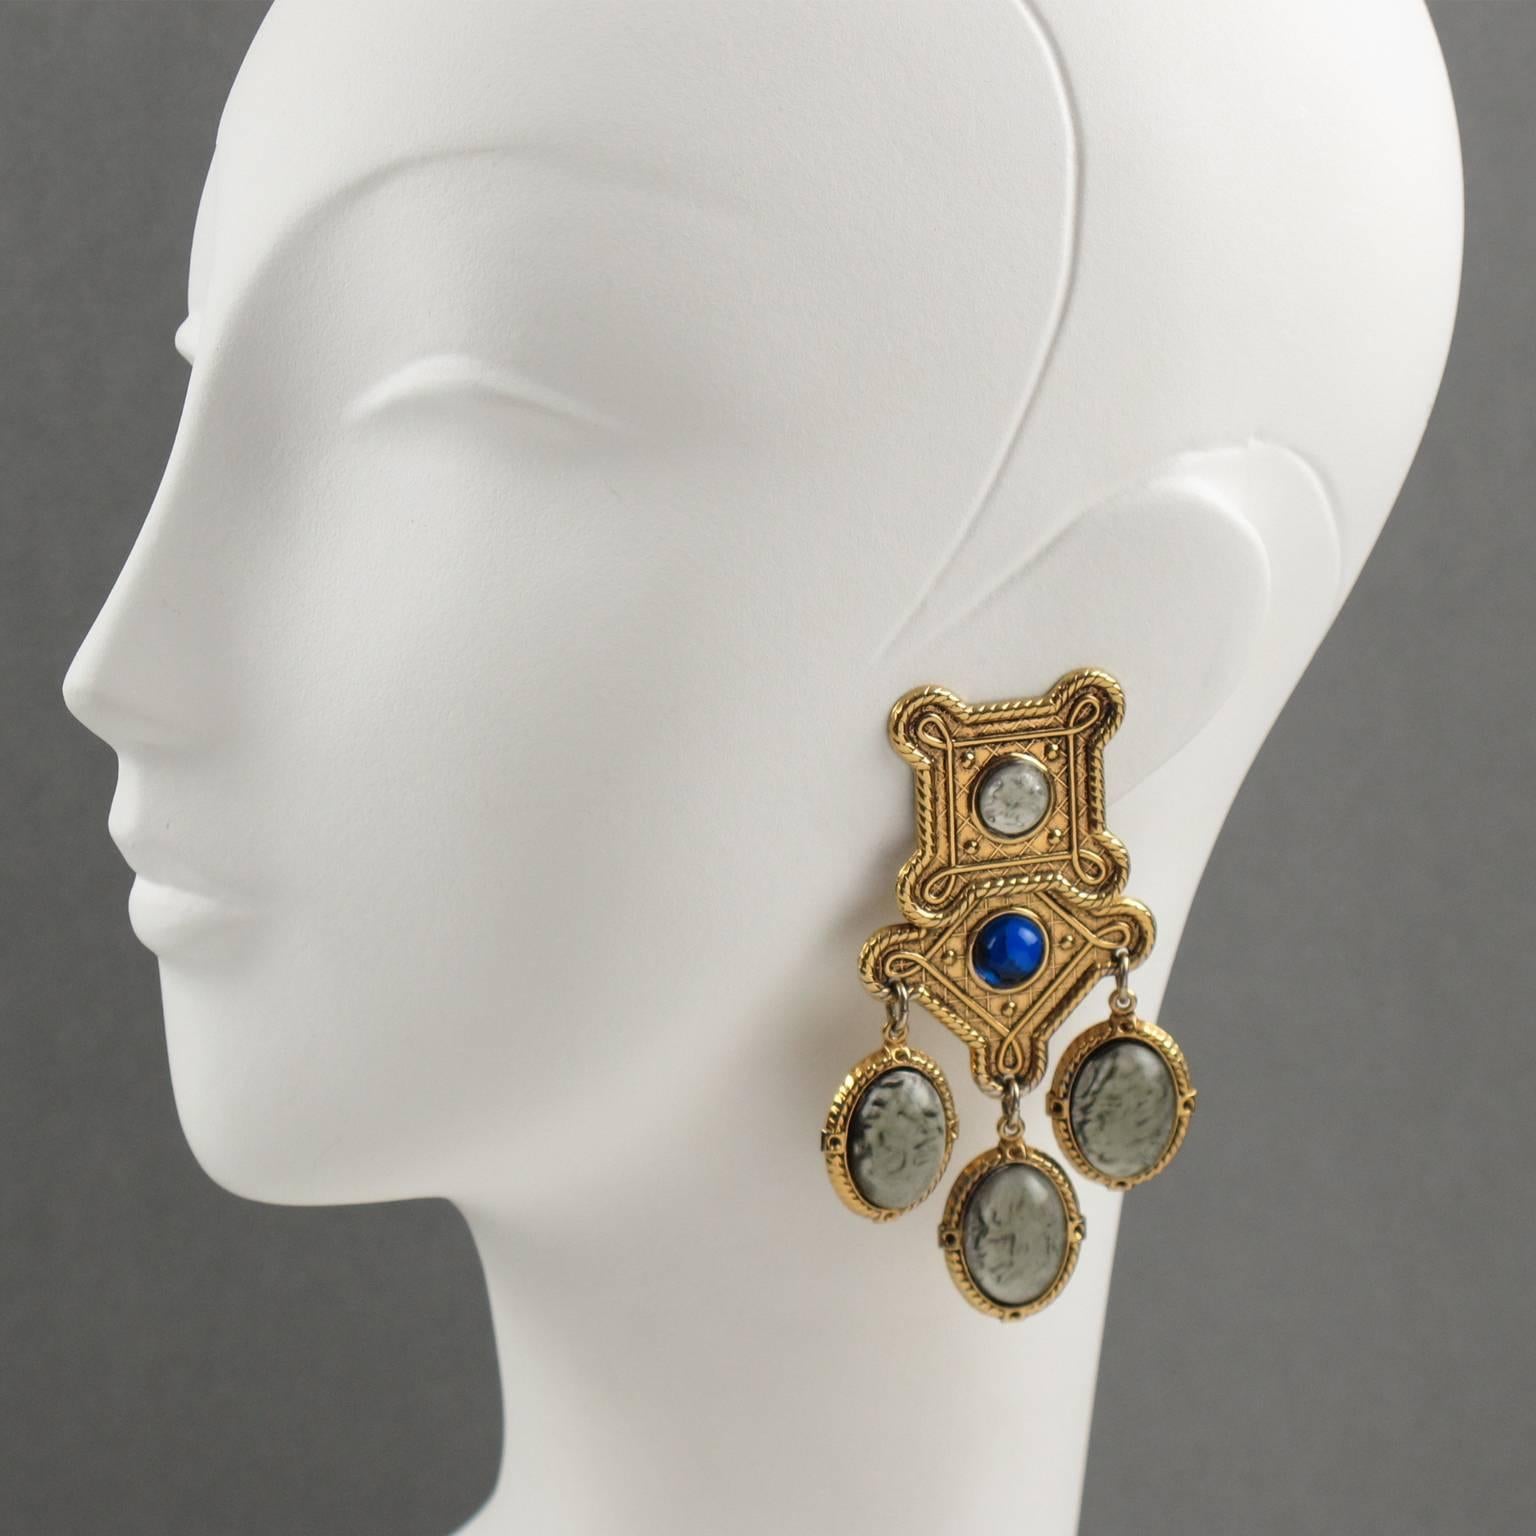 Rare vintage 1980s Zoe Coste Paris baroque dangling clip on earrings. Huge chandelier earrings featuring Byzantine style design, gilt metal all textured and ornate, topped with cobalt blue resin rhinestone and compliment with Gripoix moon-glow gray